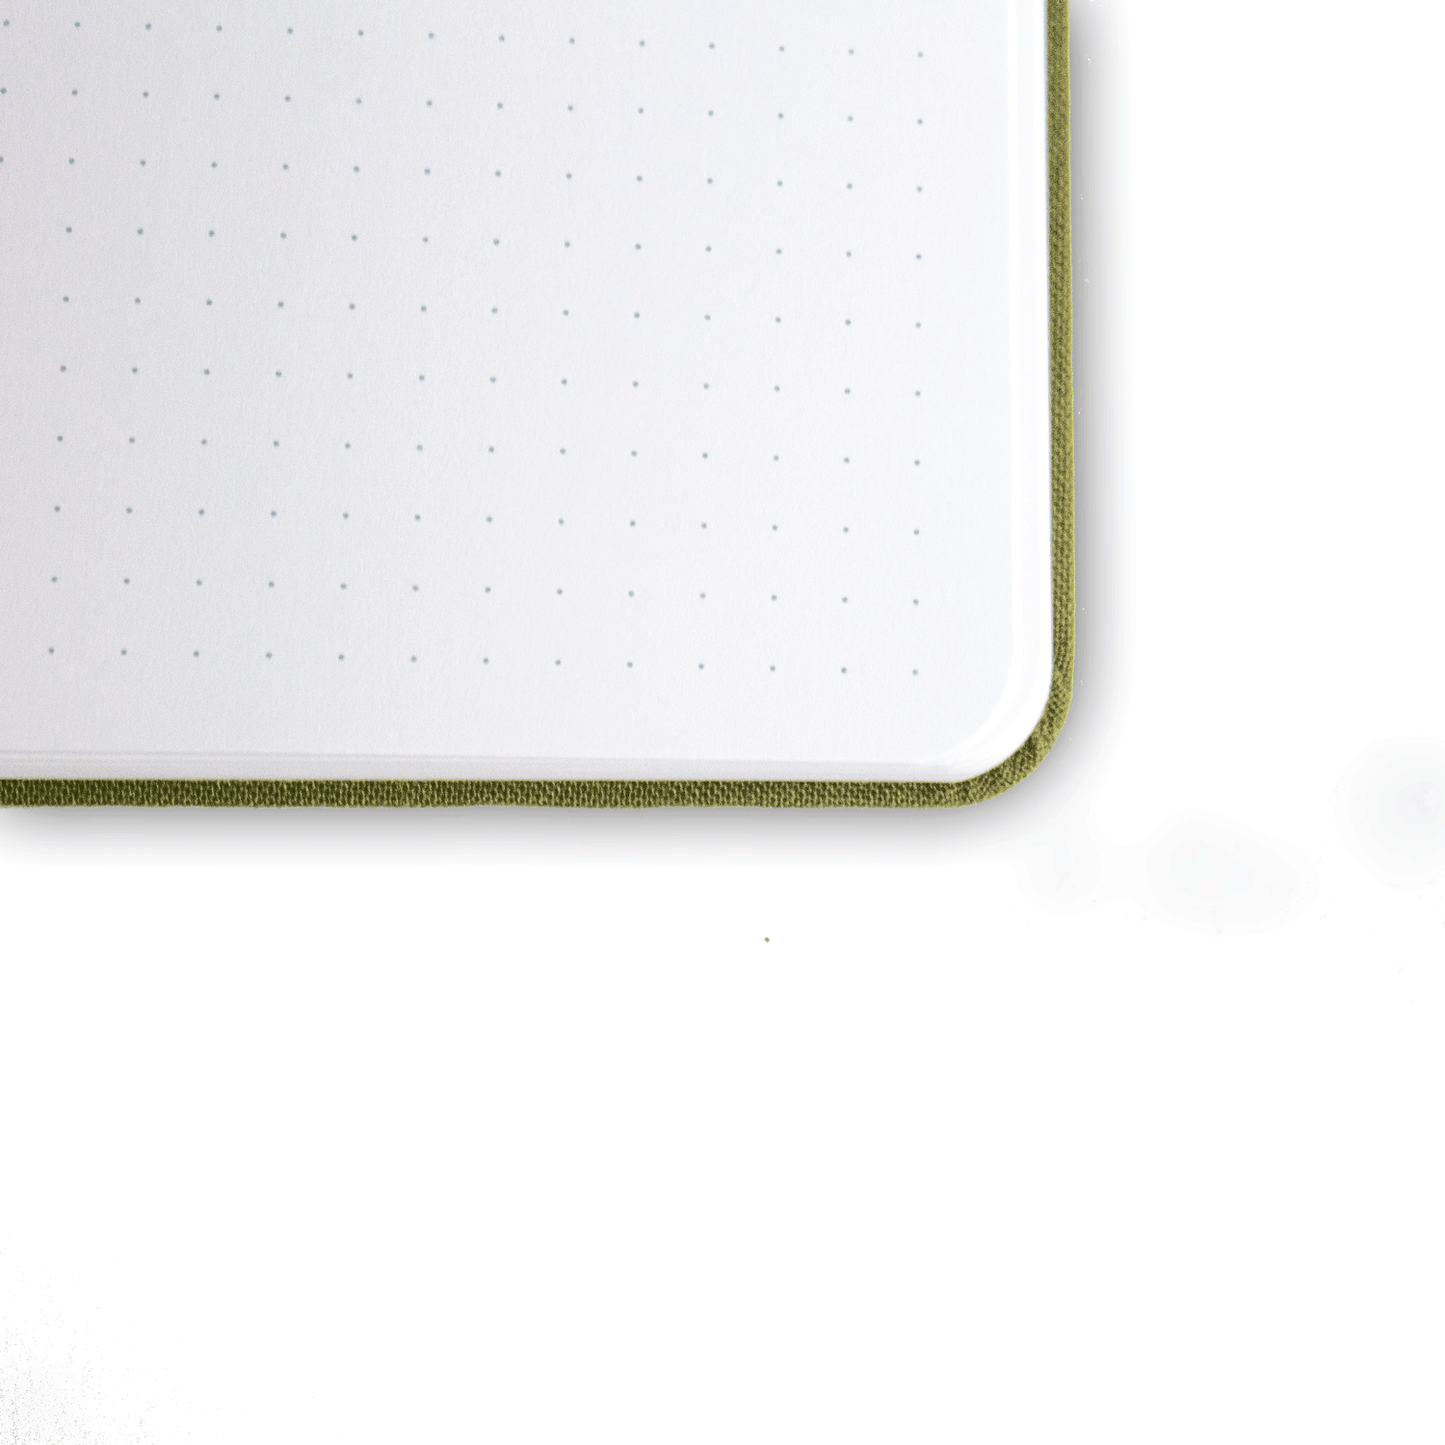 A close up of the opened bobo BuJo dot grid journal showing the white dot grid pages. 